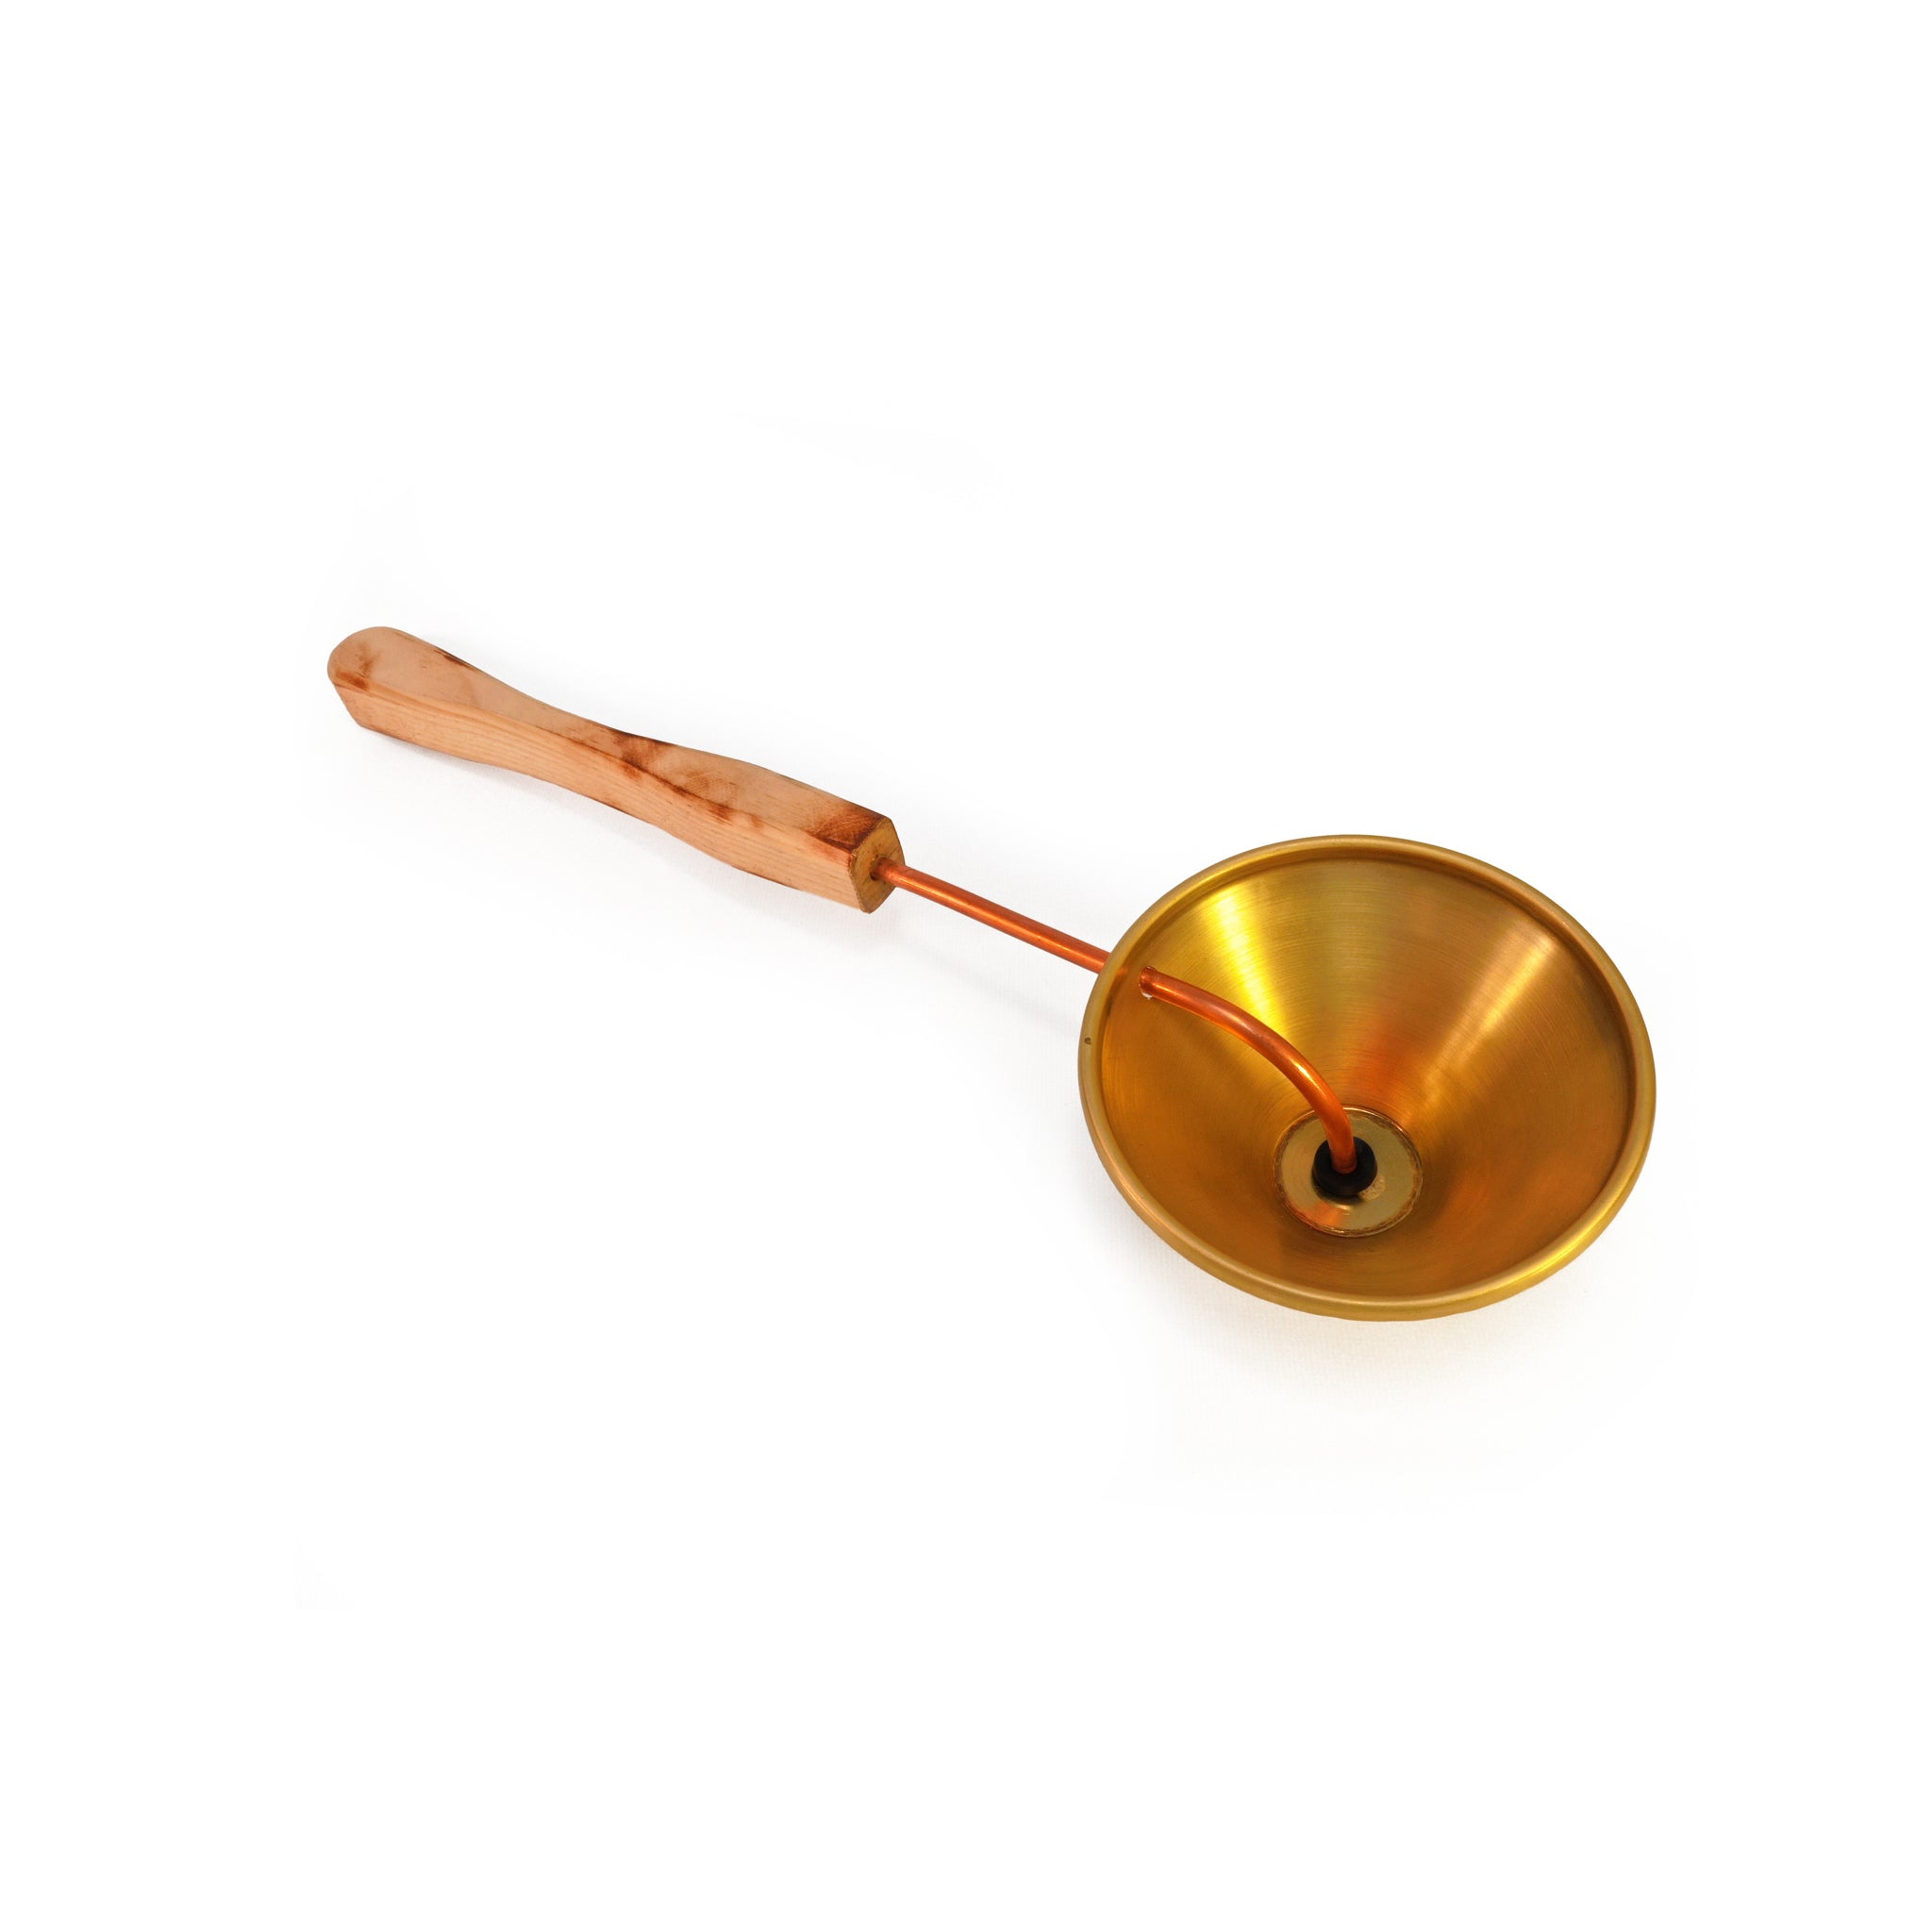 Wood, brass, and copper sauna scoop on white background.